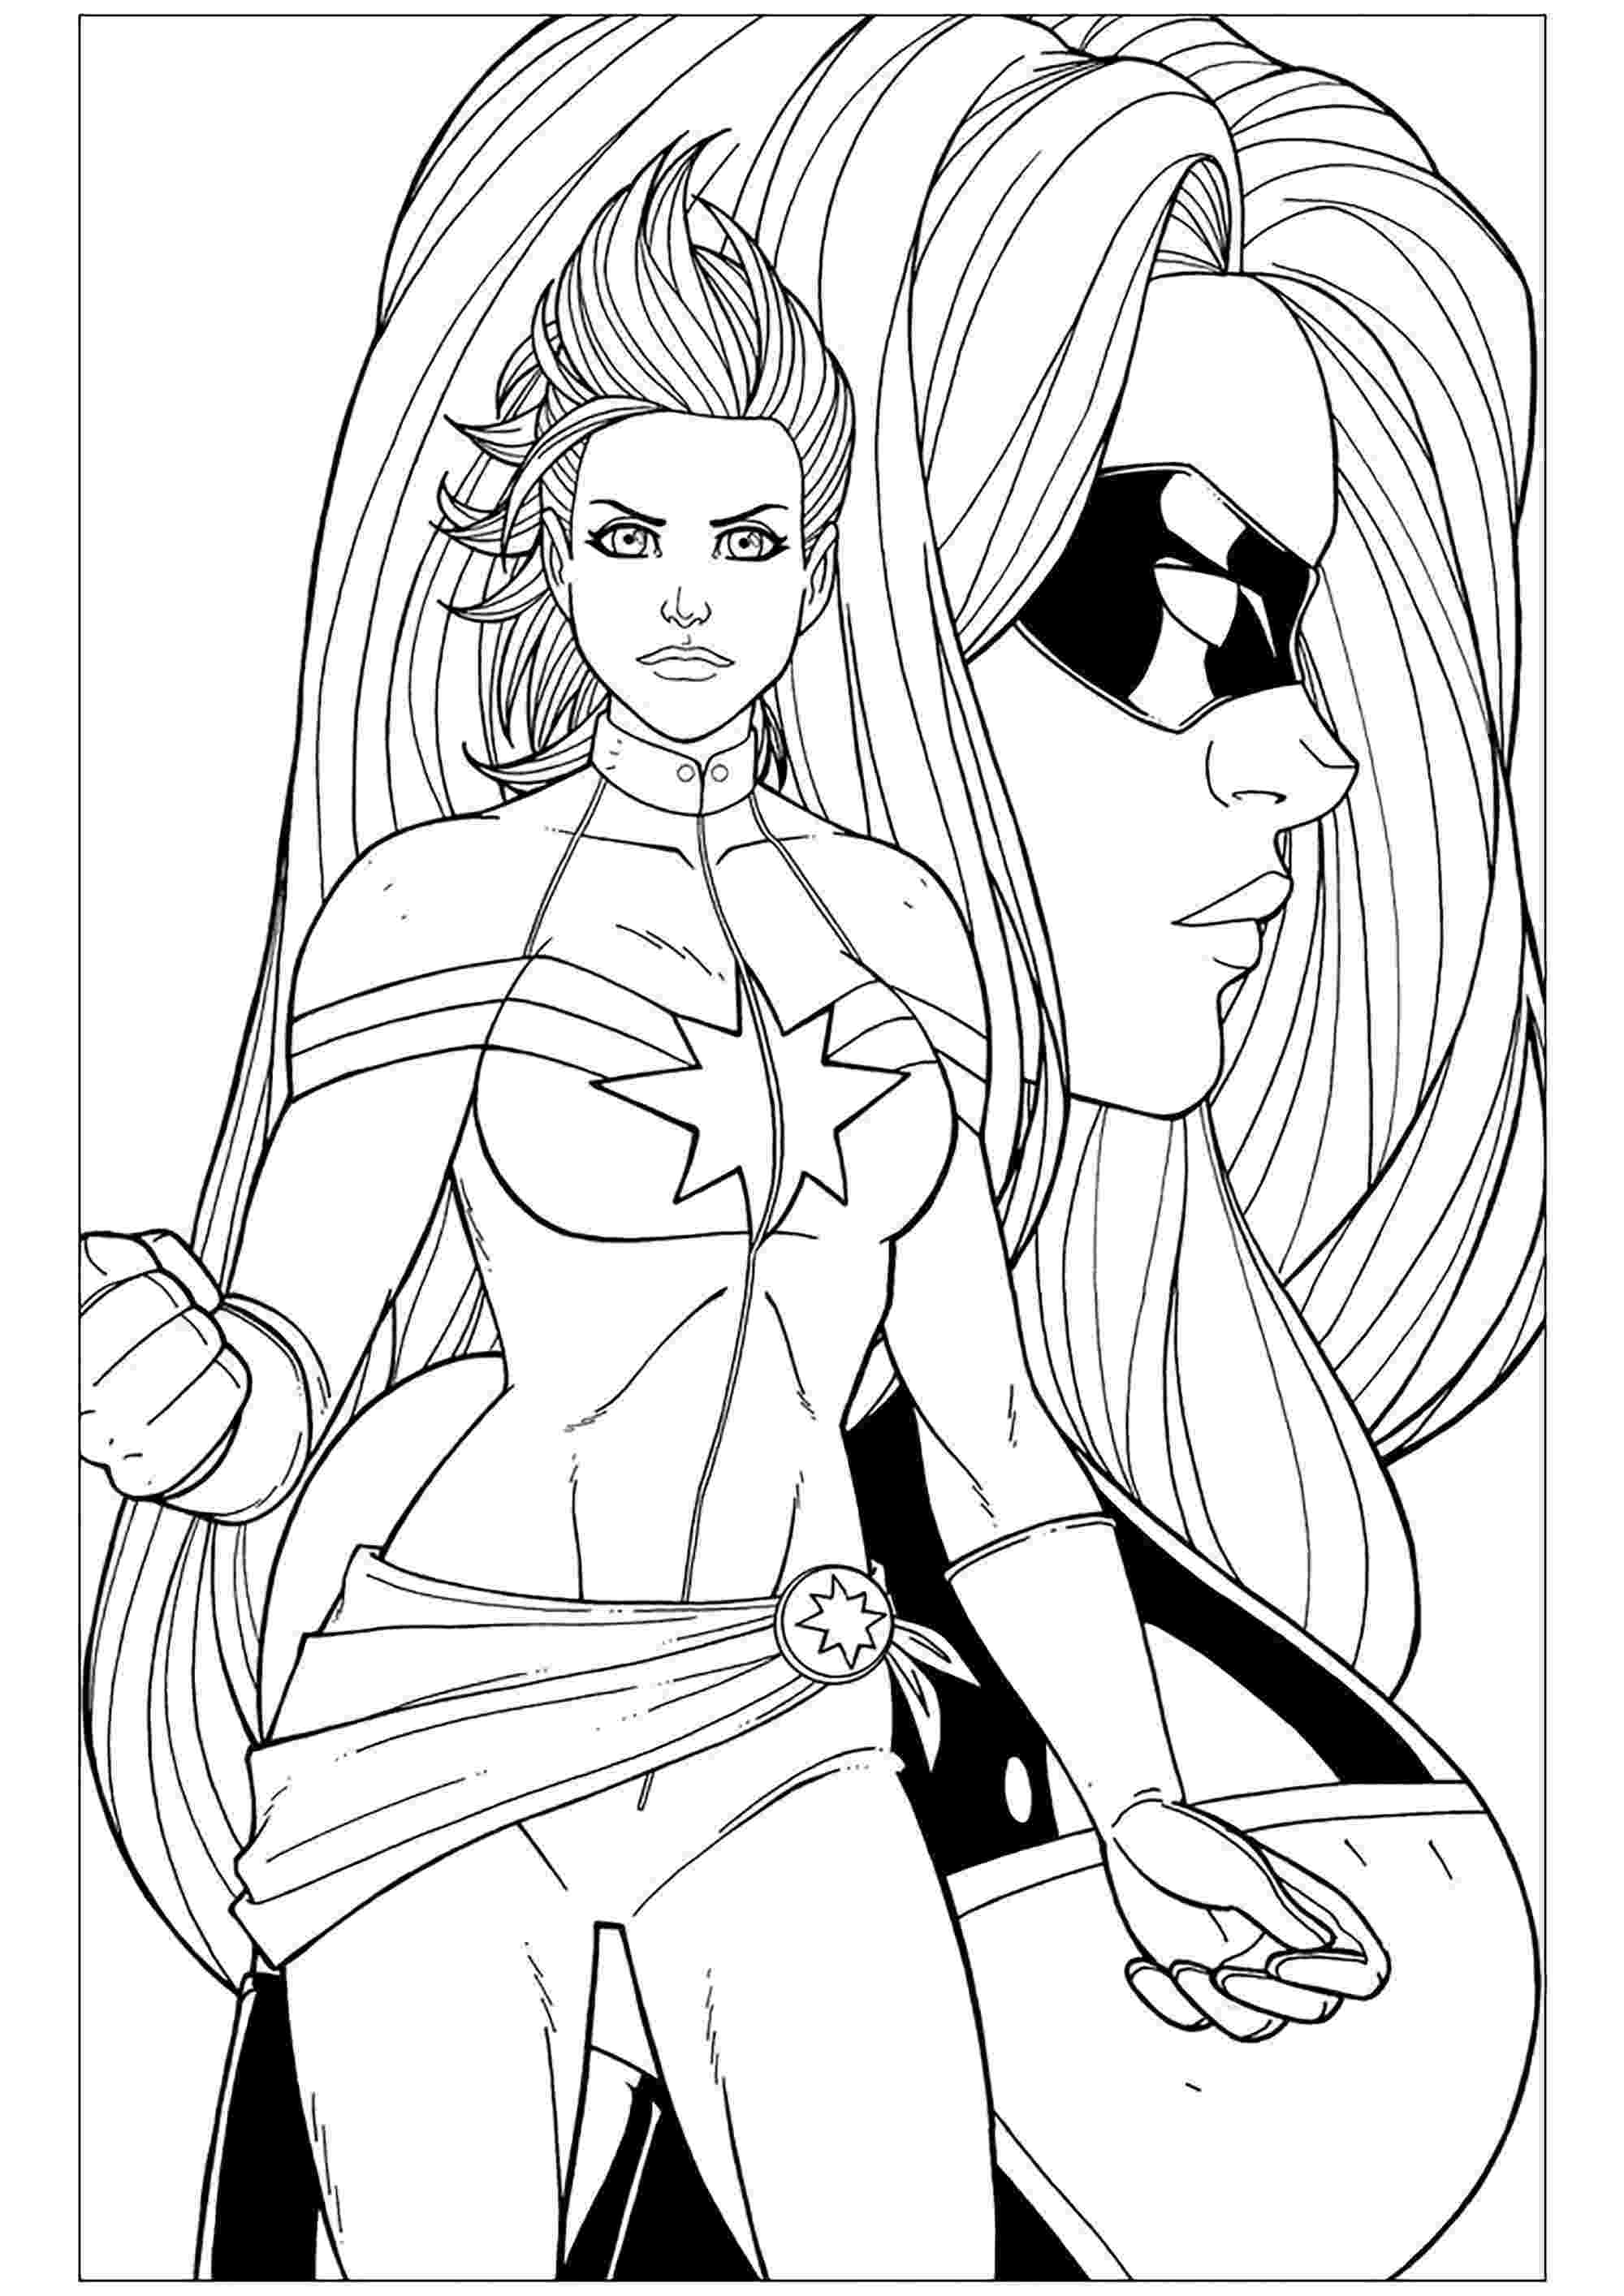 marvel coloring page marvel coloring pages best coloring pages for kids page coloring marvel 1 1